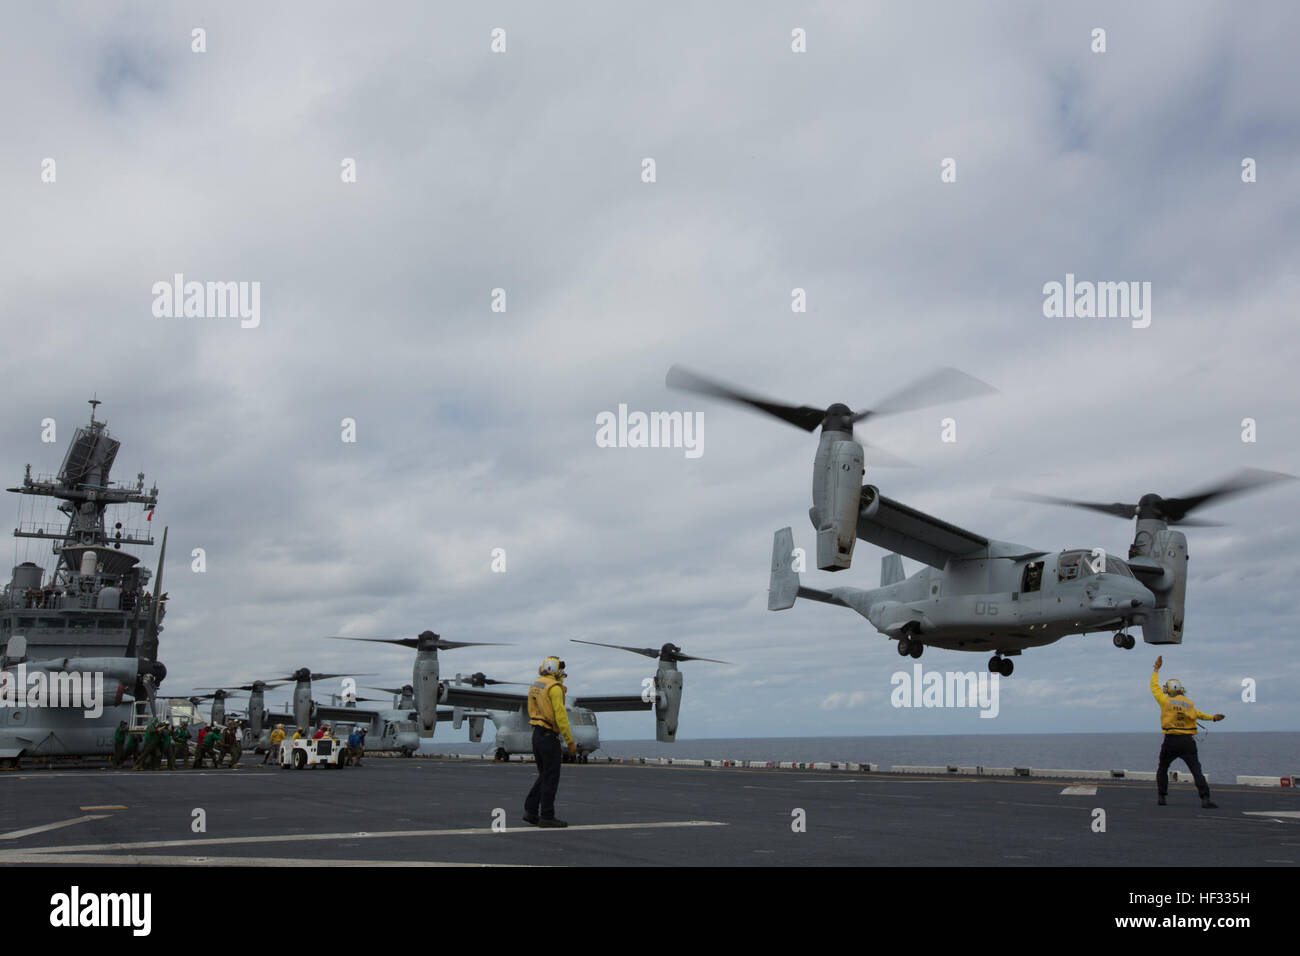 A U.S. Marine Corps MV-22B Osprey lifts off during flight operations on the USS Bonhomme Richard (LHD 6), at sea, March 14, 2015. The Ospreys are with Marine Medium Tiltrotor Squadron (VMM) 262 (Reinforced), 31st Marine Expeditionary Unit (MEU).  VMM-262 (REIN) is the aviation combat element for the 31st MEU. The 31st MEU is participating in amphibious integration training with the Bonhomme Richard Amphibious Ready Group during their Spring Patrol of the Asia-Pacific region. (U.S. Marine Corps photo by Staff Sgt. Joseph DiGirolamo/Released) Ospreys Transport Marines to Airfield Seizure Trainin Stock Photo